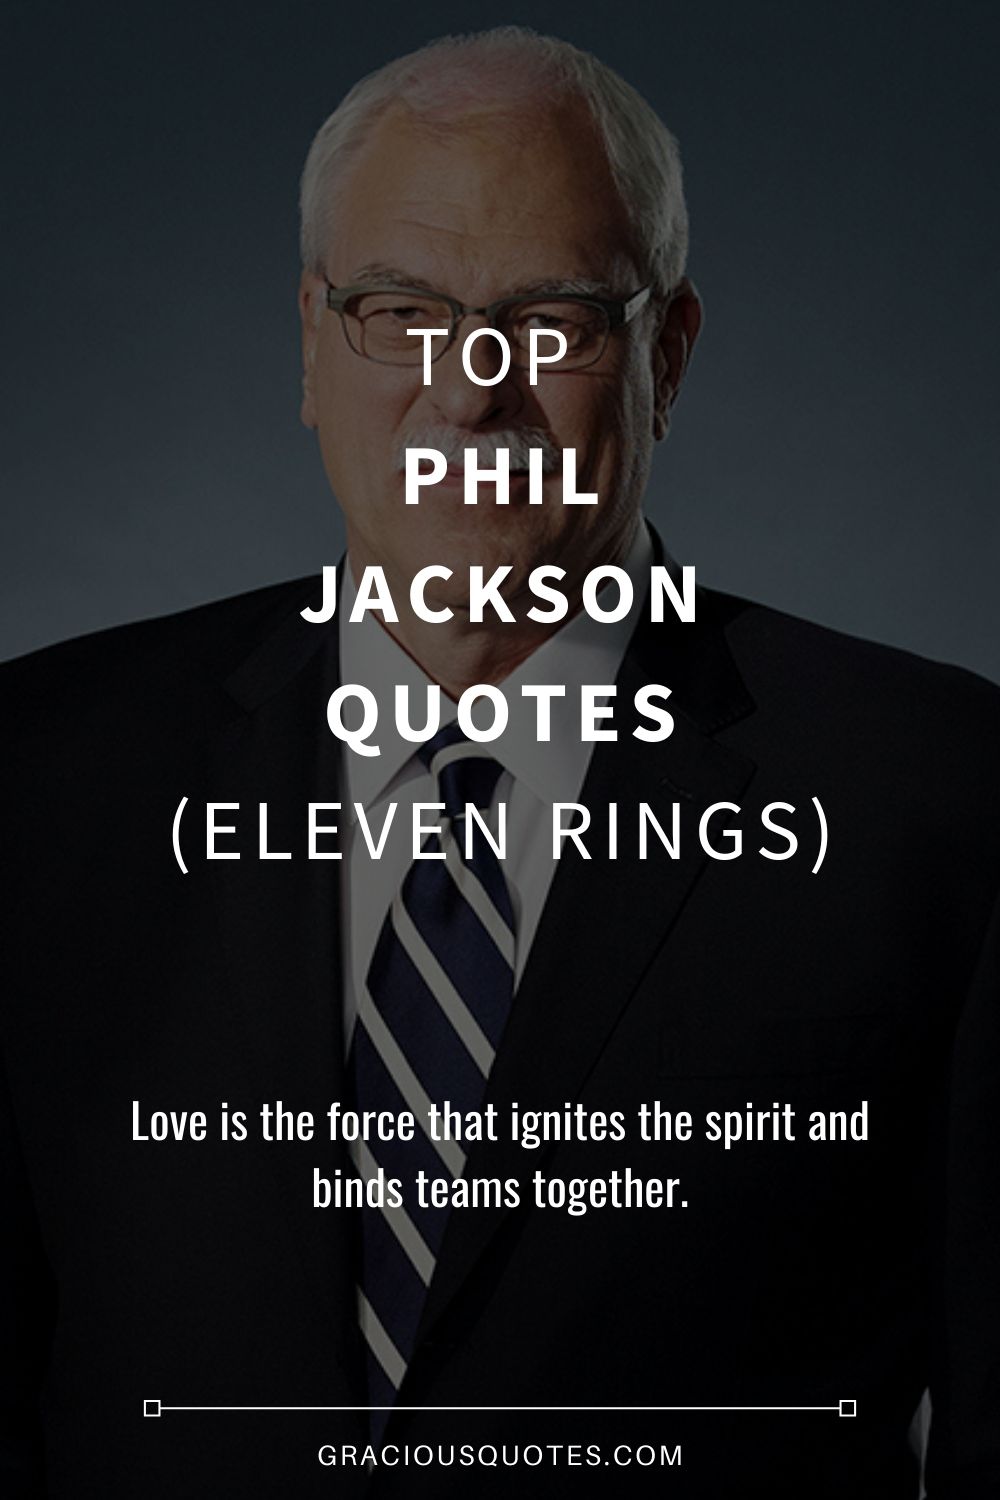 Top Phil Jackson Quotes (ELEVEN RINGS) - Gracious Quotes